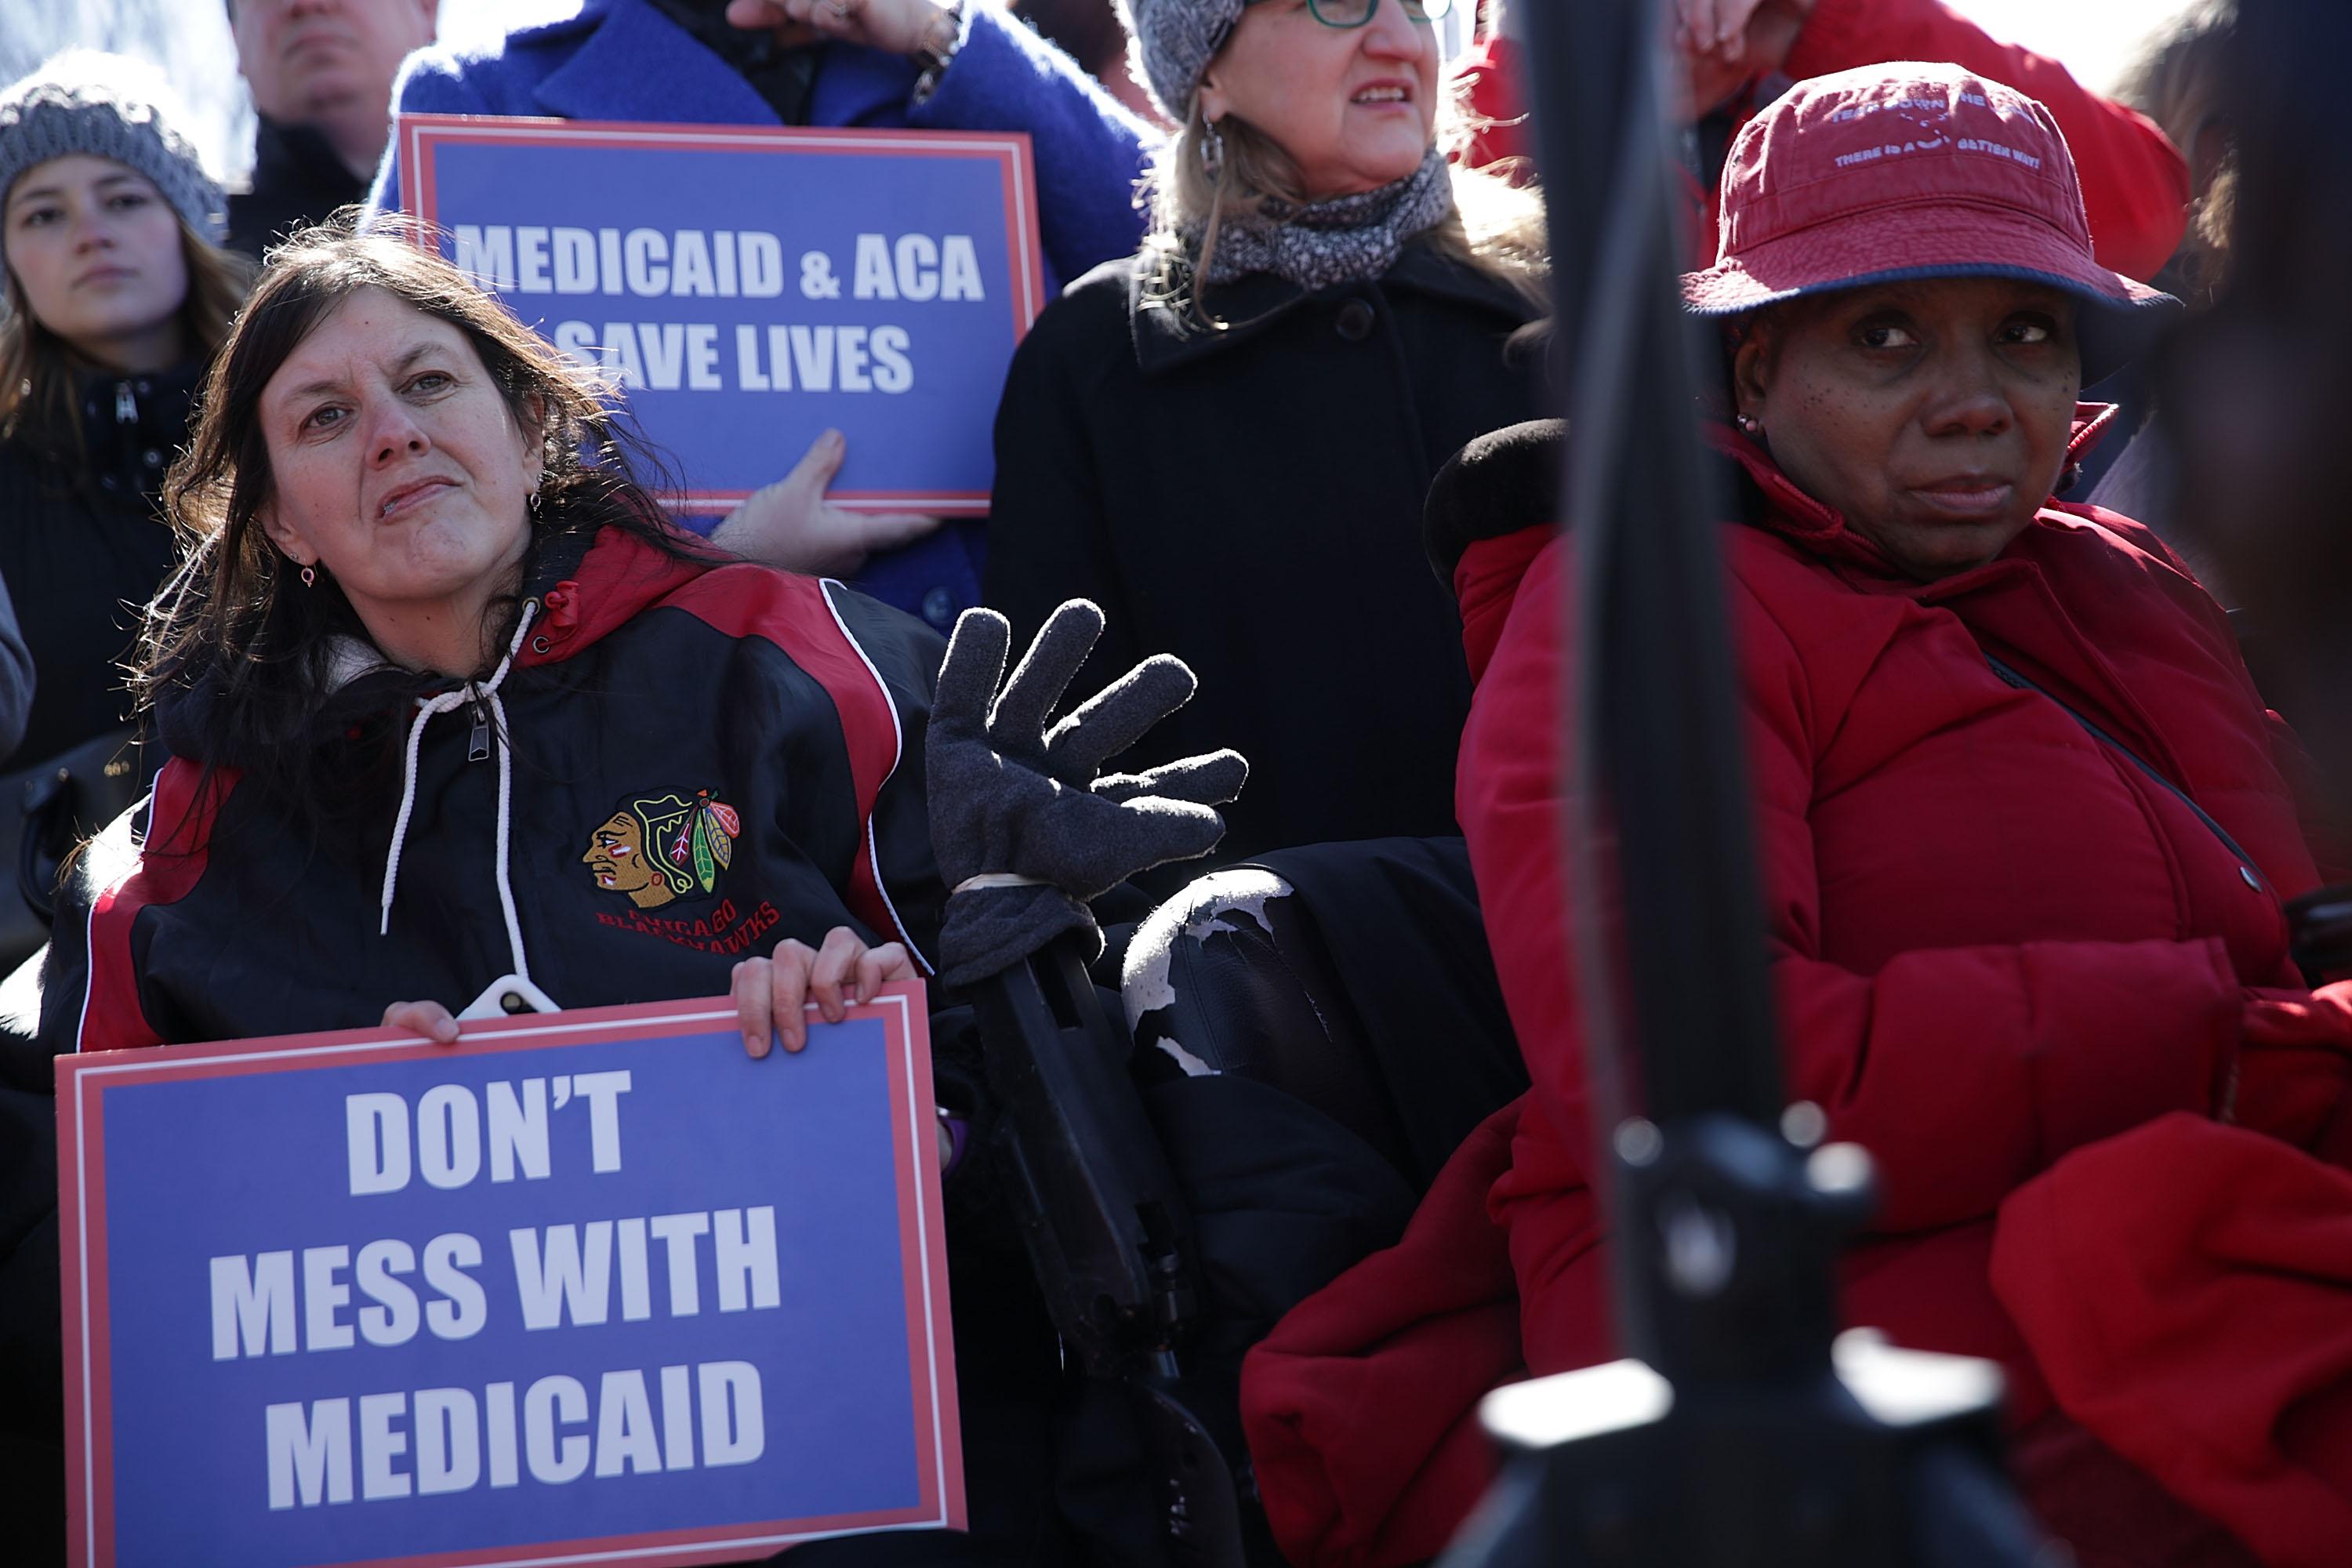 WASHINGTON, DC - MARCH 22:  Health care activists participate in a rally in front of the Capitol March 22, 2017 on Capitol Hill in Washington, DC. Senate Democrats held the rally to highlight changes being sought in Medicaid in the Republican American Health Care Act.  (Photo by Alex Wong/Getty Images)